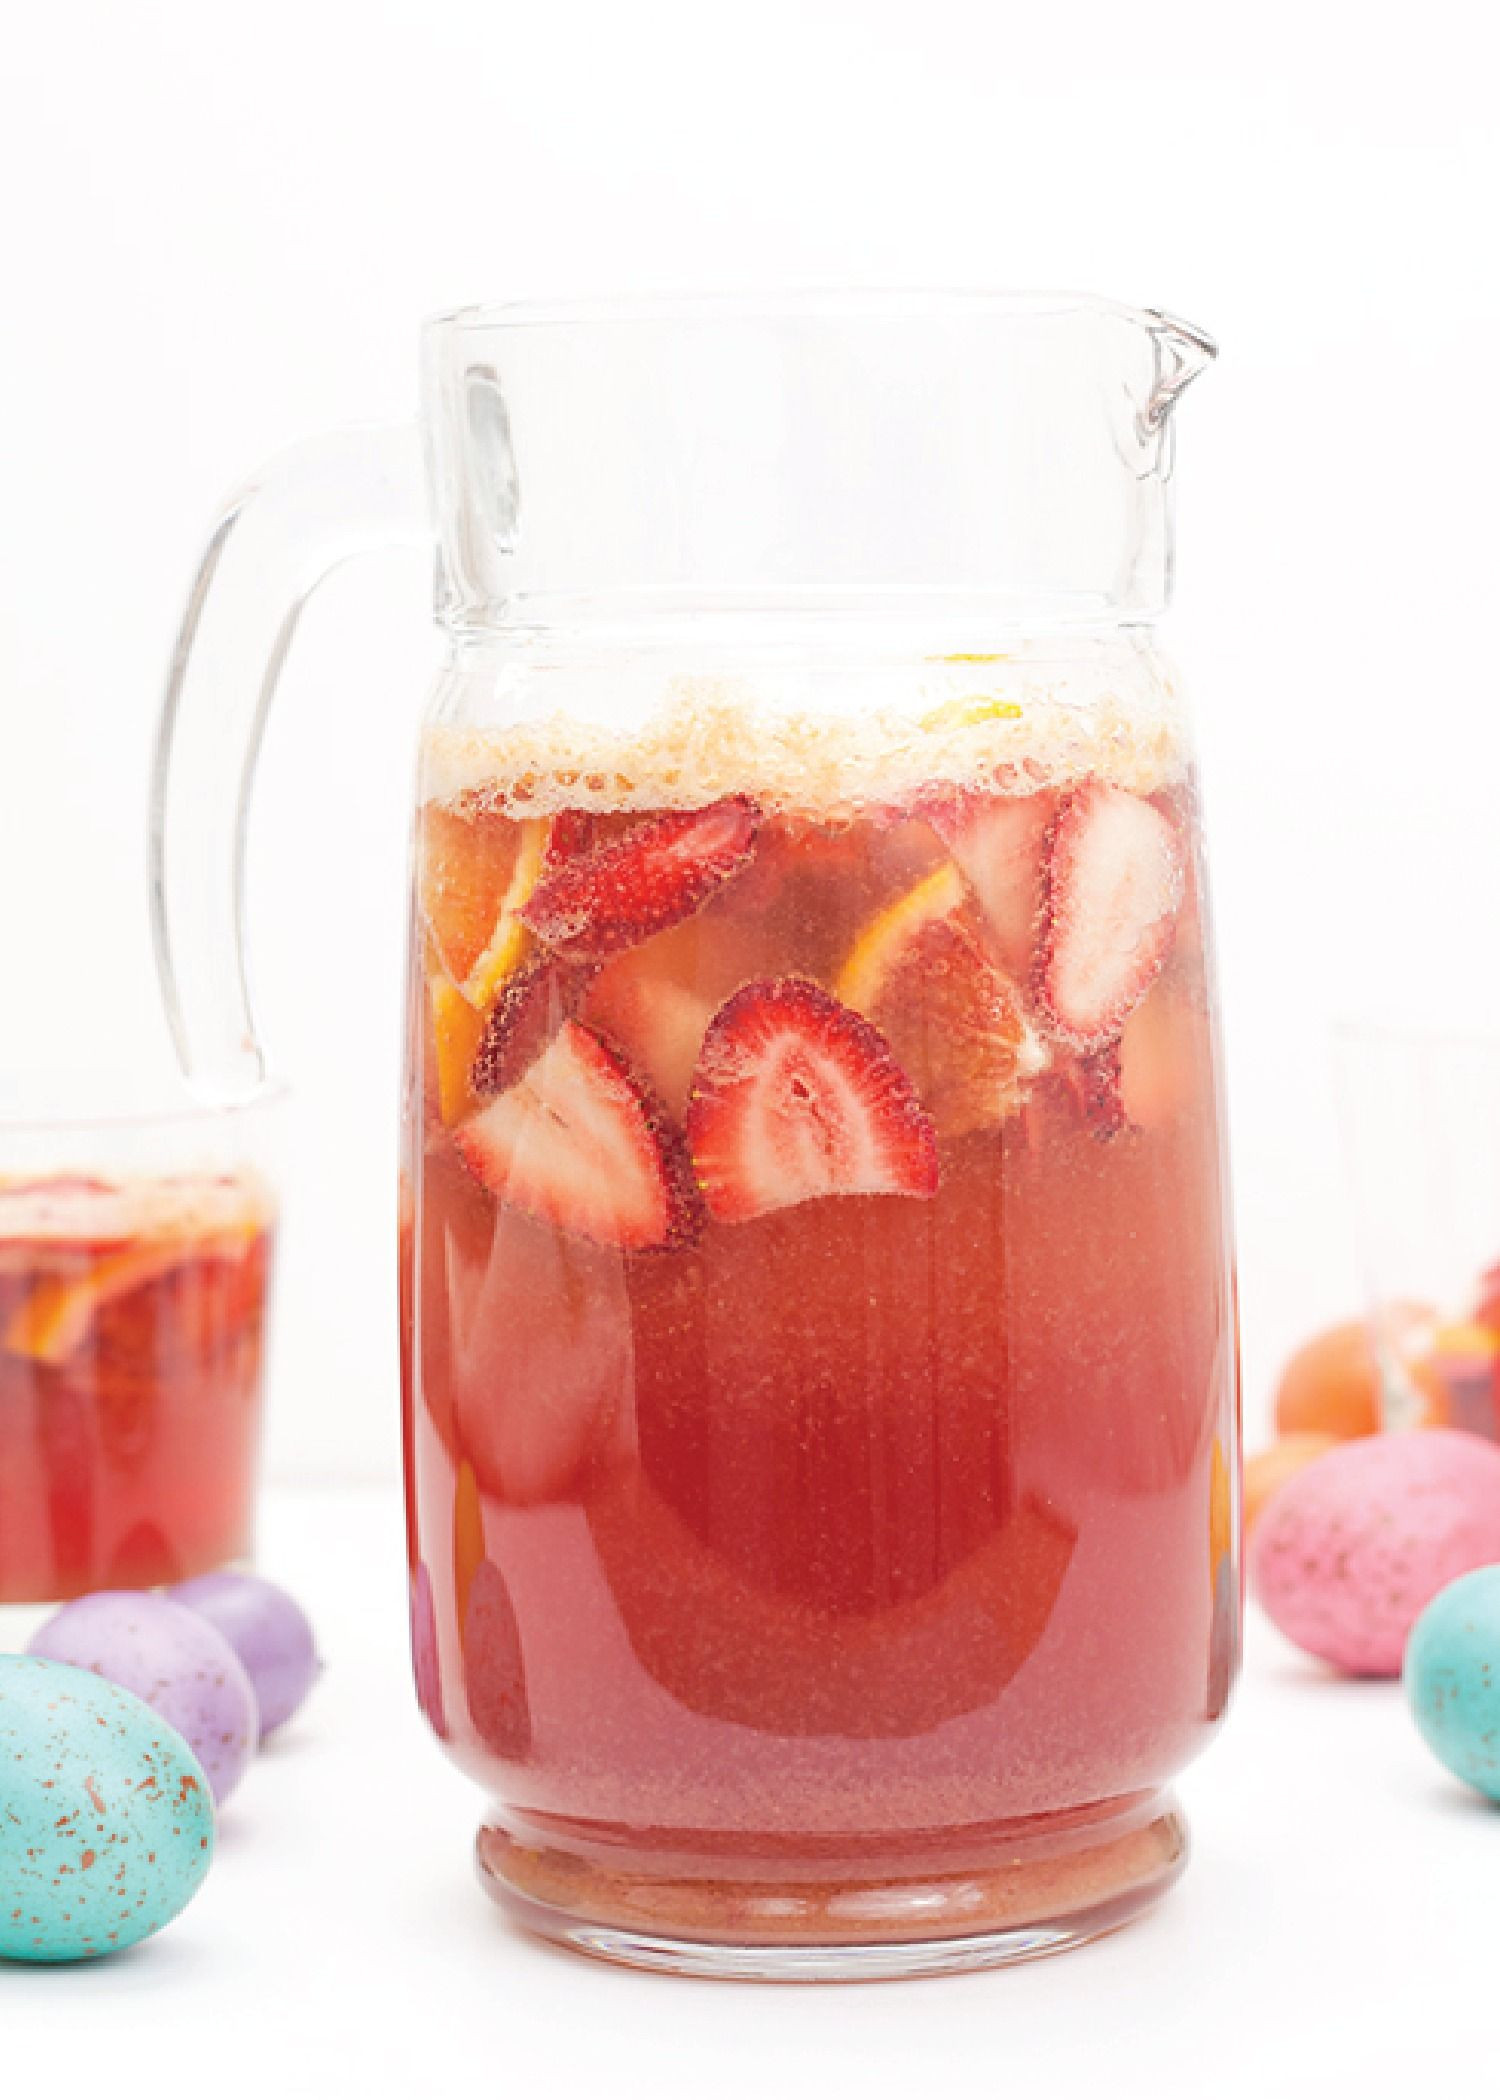 Kid Friendly Punch Bowl Recipes
 Easter Punch Recipe for Brunch And it s Kid Friendly